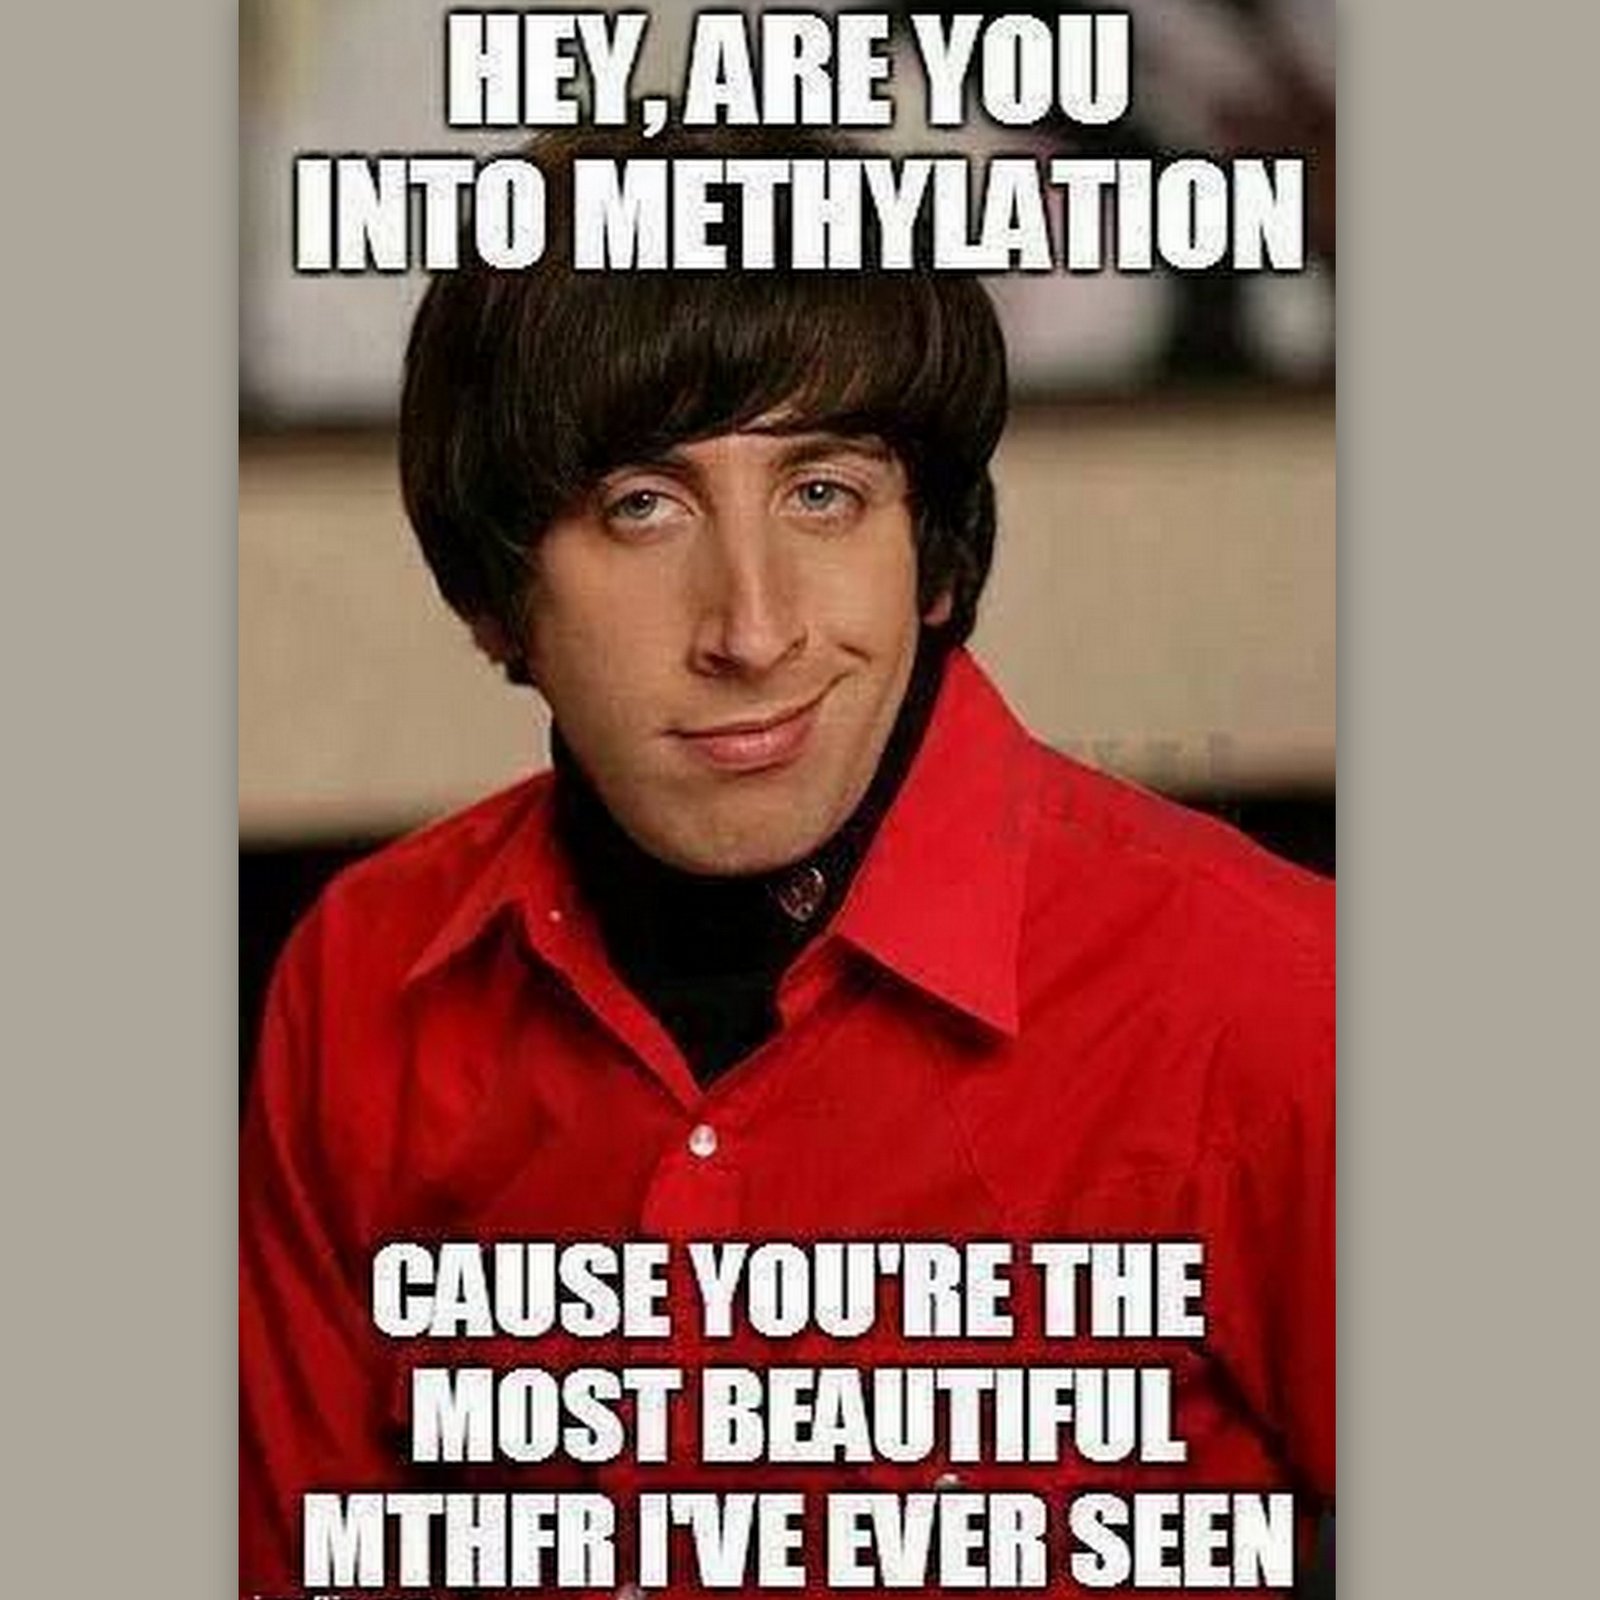 Hey, are you into methylation cause you're the most beautiful MTHFR I've ever seen (Howard from Big Bang Theory)